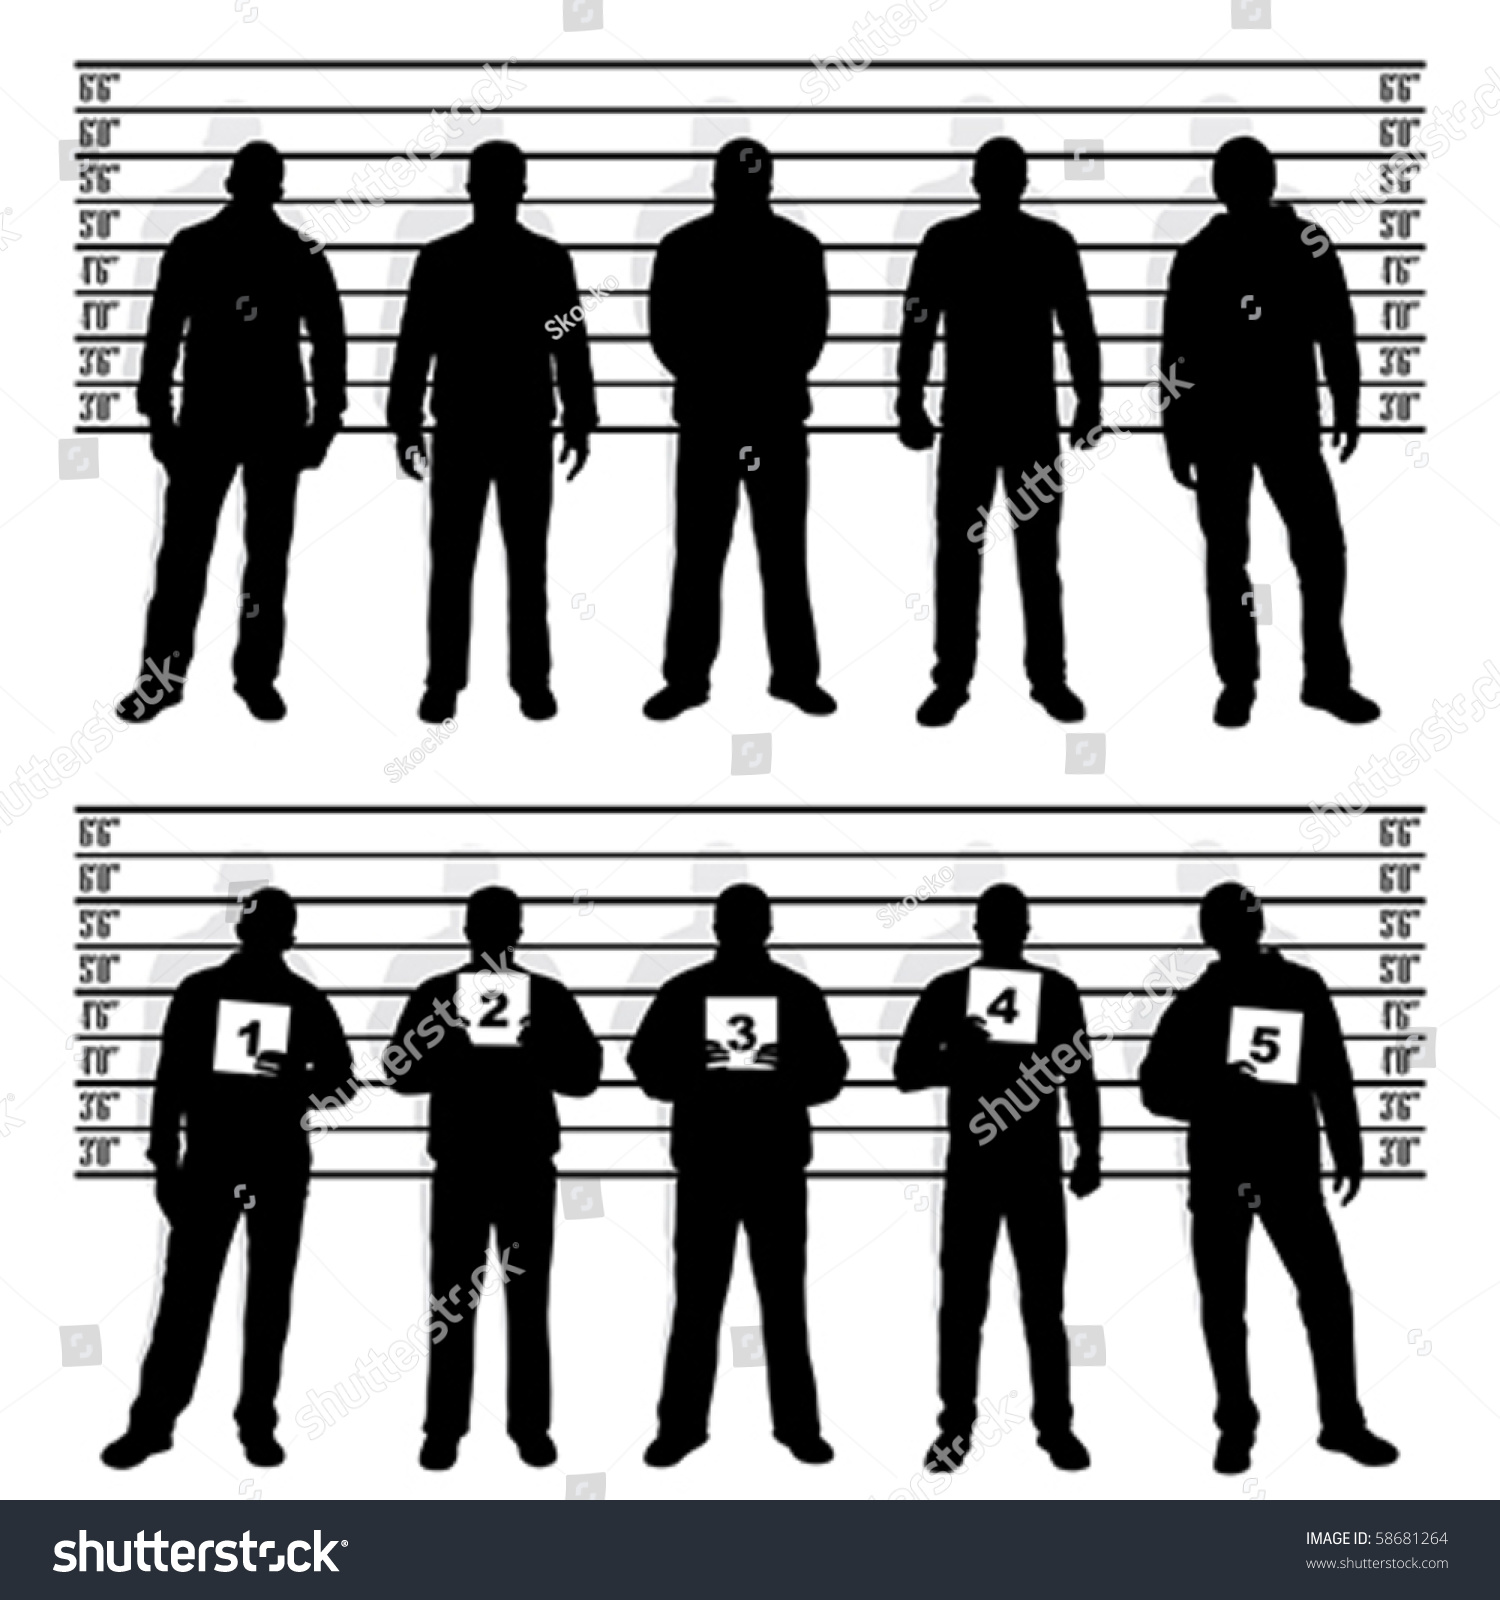 stock-vector-police-line-up-silhouettes-